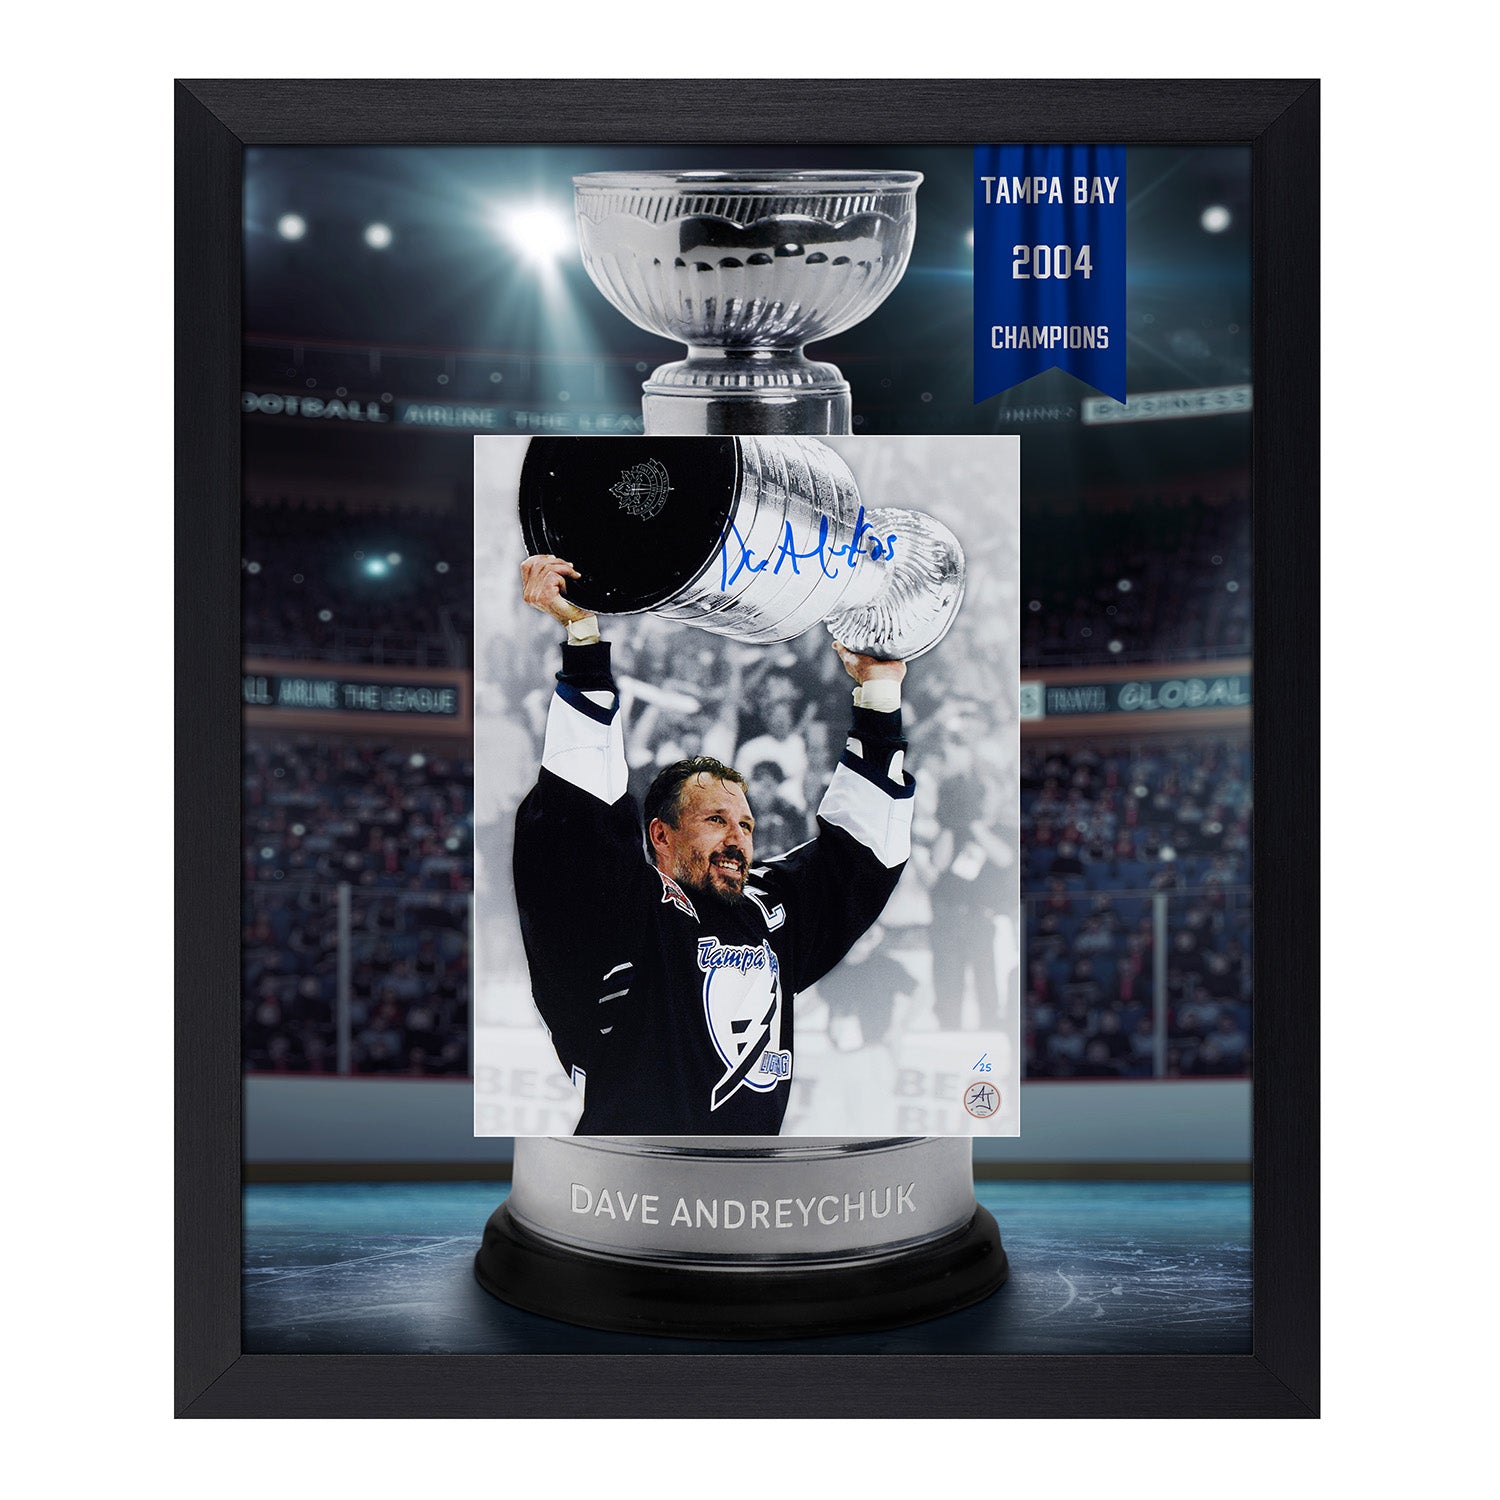 Dave Andreychuk Signed Tampa Bay Lightning Cup Champion Graphic 23x27 Frame